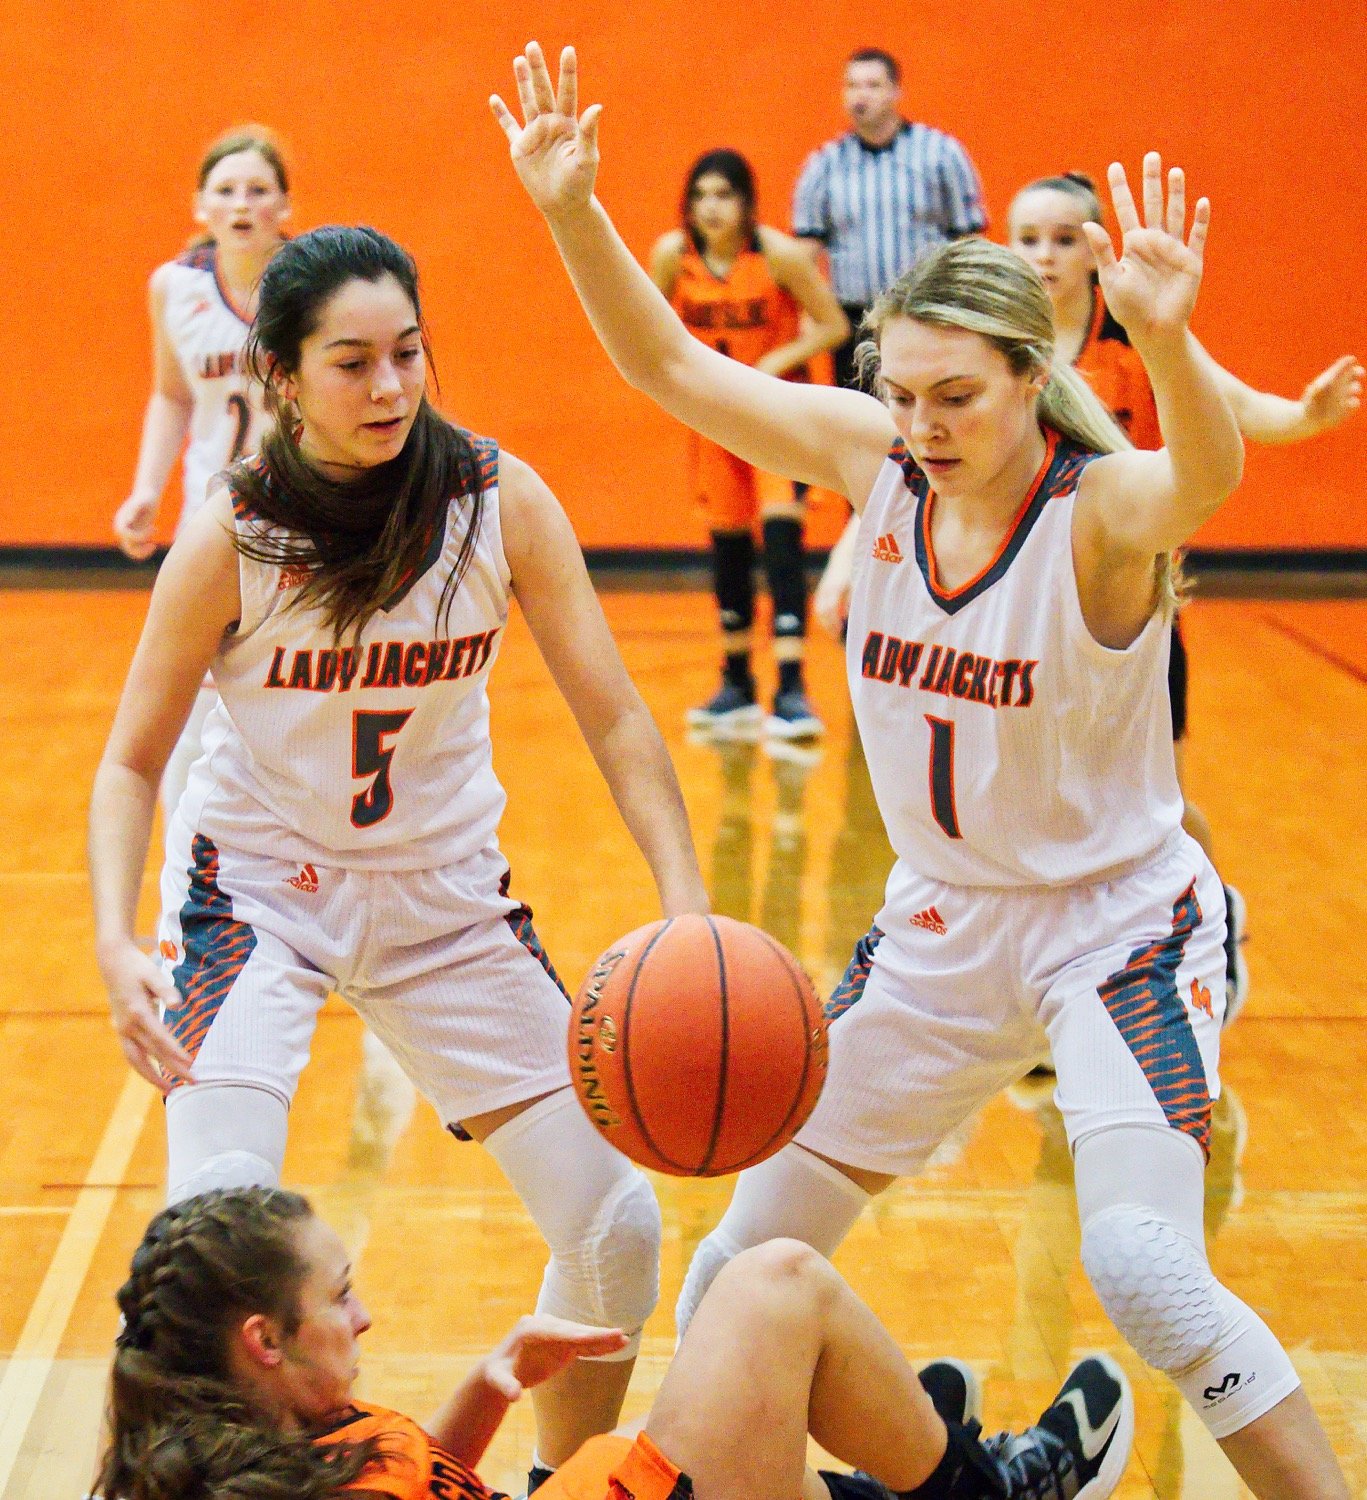 Kapri Riley (5) and Ava Johnson (1) put the defensive clamps on Grand Saline, part of a defensive effort that held the visiting Lady Indians to just 13 points. [more shots plus prints available]